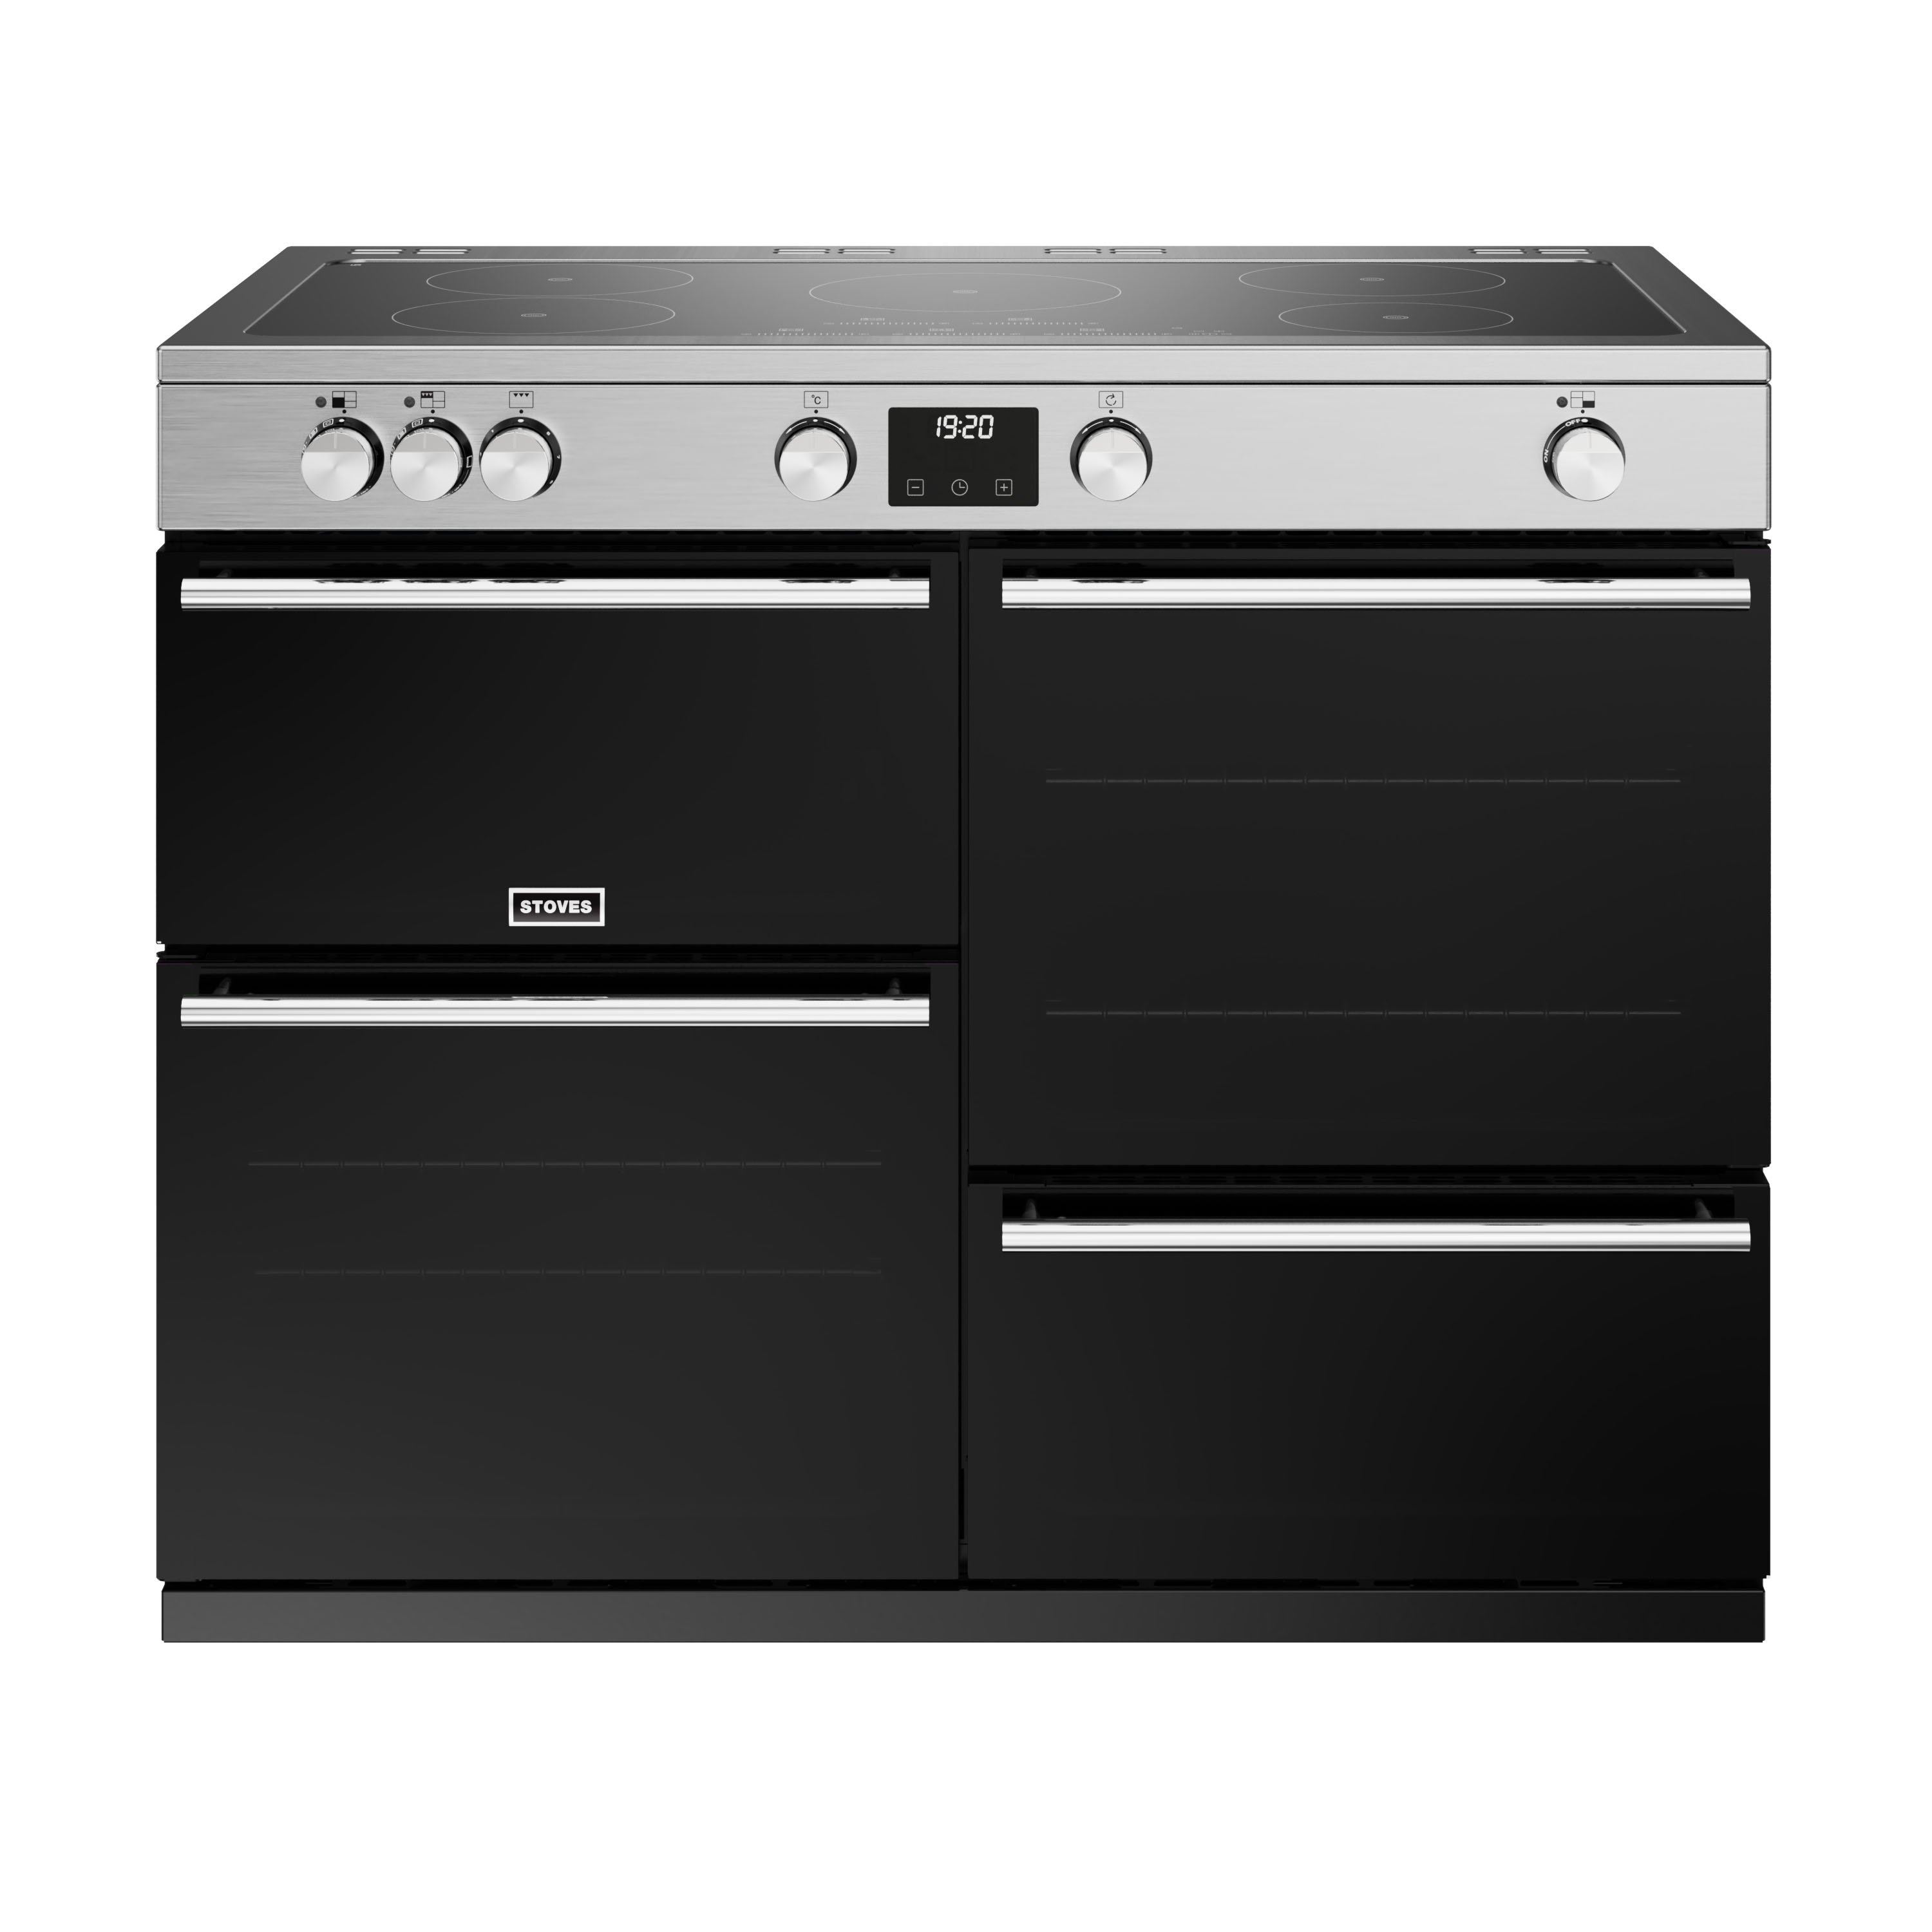 110cm electric induction range cooker with a 5 zone touch control hob, conventional oven & grill, multifunction main oven with TrueTemp digital thermostat, fanned second oven and dedicated slow cook oven